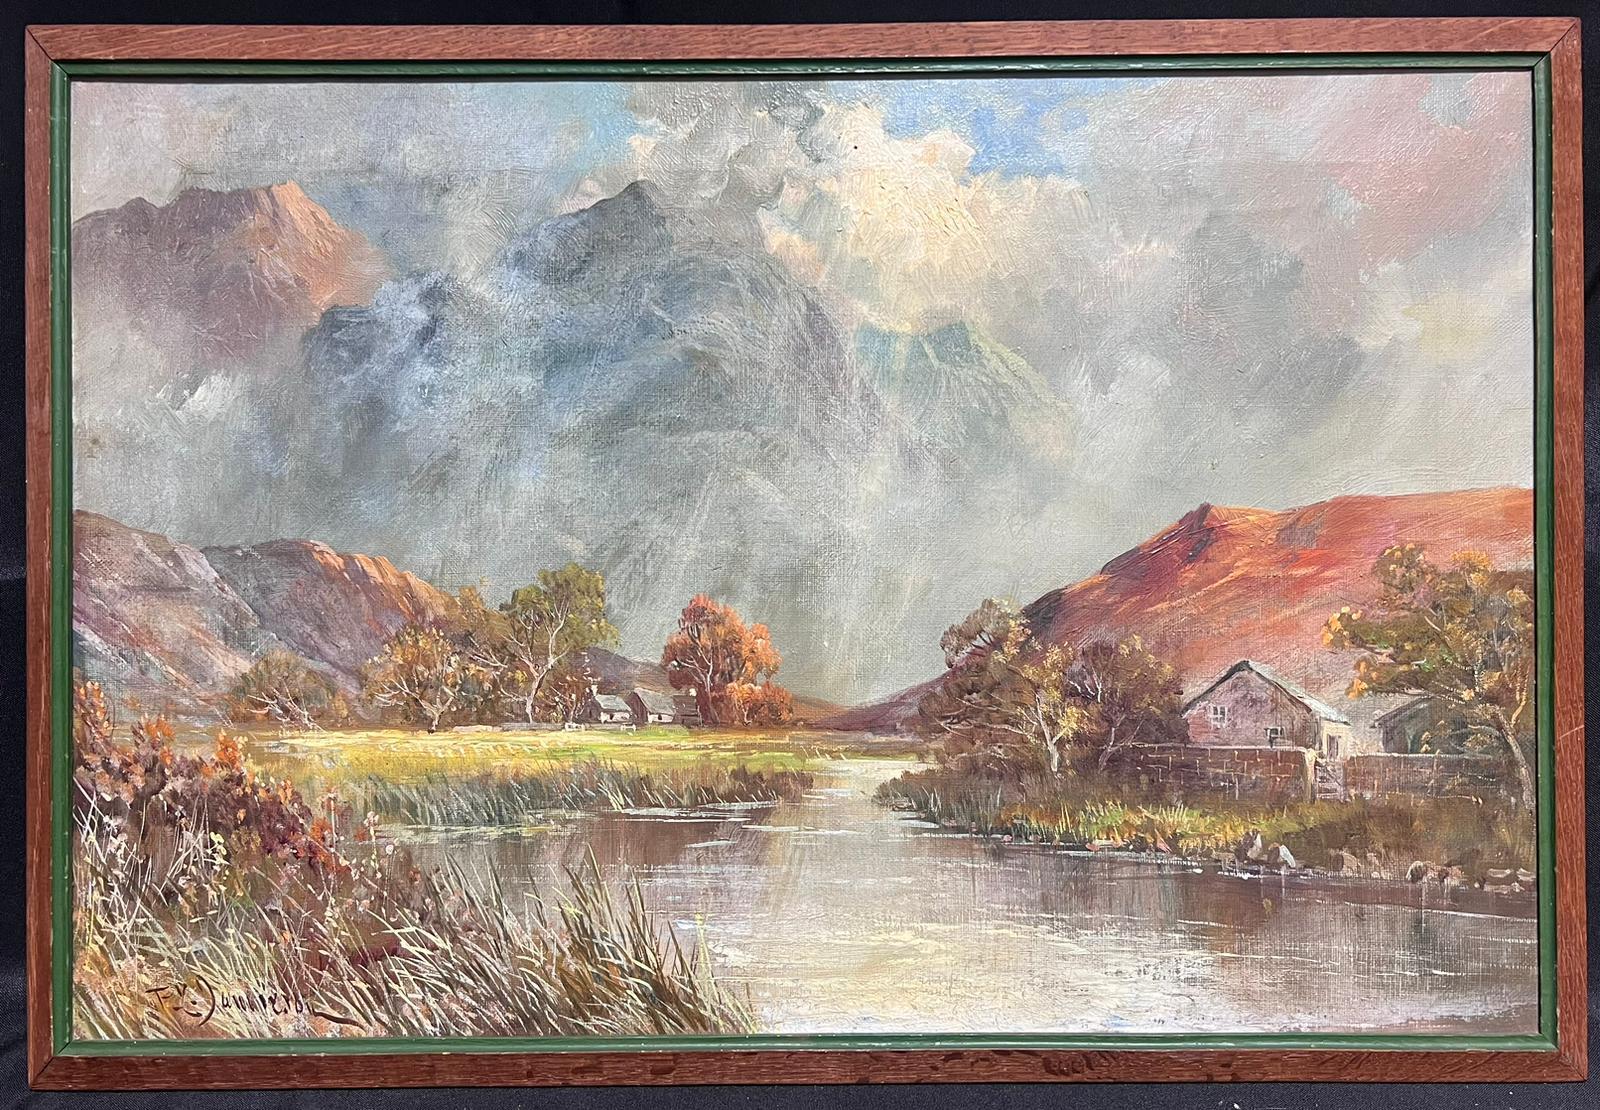 The Highland Loch
signed by F. E. Jamieson (British 1895-1950)
indistinctly titled verso, most likely a loch in the Trossochs region of Argyll. 
oil painting on canvas, framed
framed: 17.5 x 25.5 inches
canvas : 16 x 24 inches
provenance: private